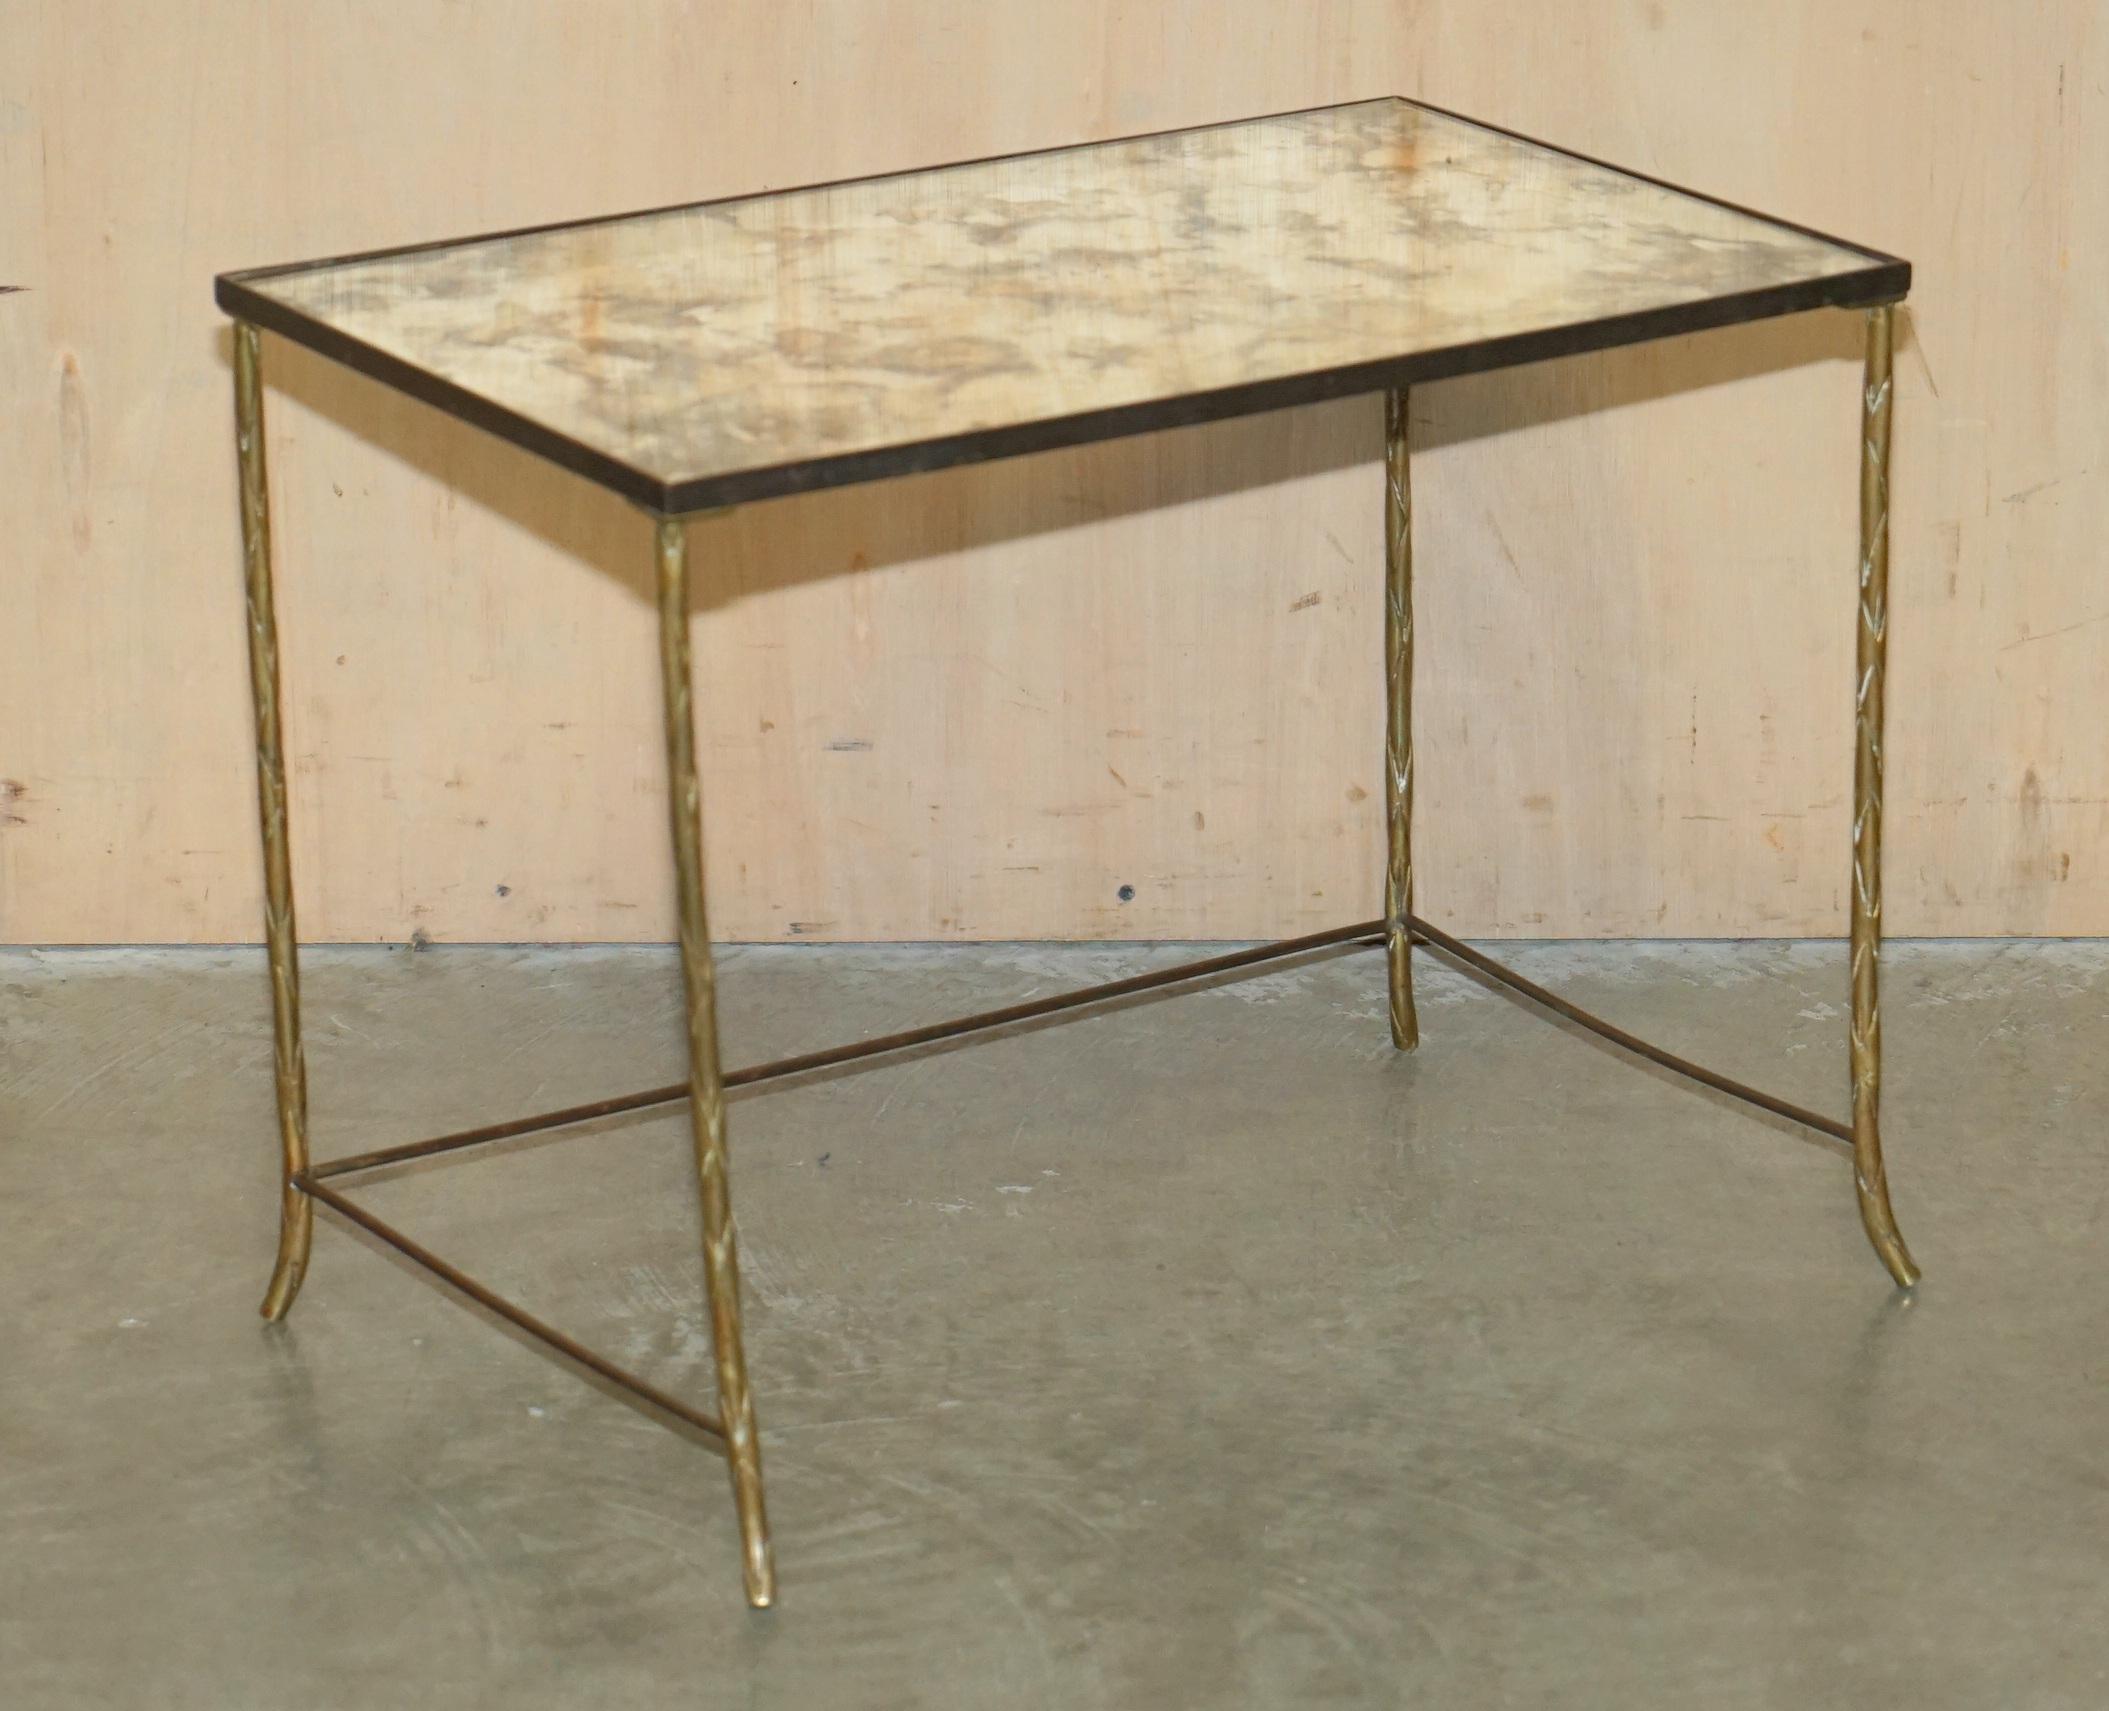 Royal House Antiques

Royal House Antiques is delighted to offer for sale this Stunning Maison Jansen foxed glass nest of tables with gold gilt frames. 

Please note the delivery fee listed is just a guide, it covers within the M25 only for the UK